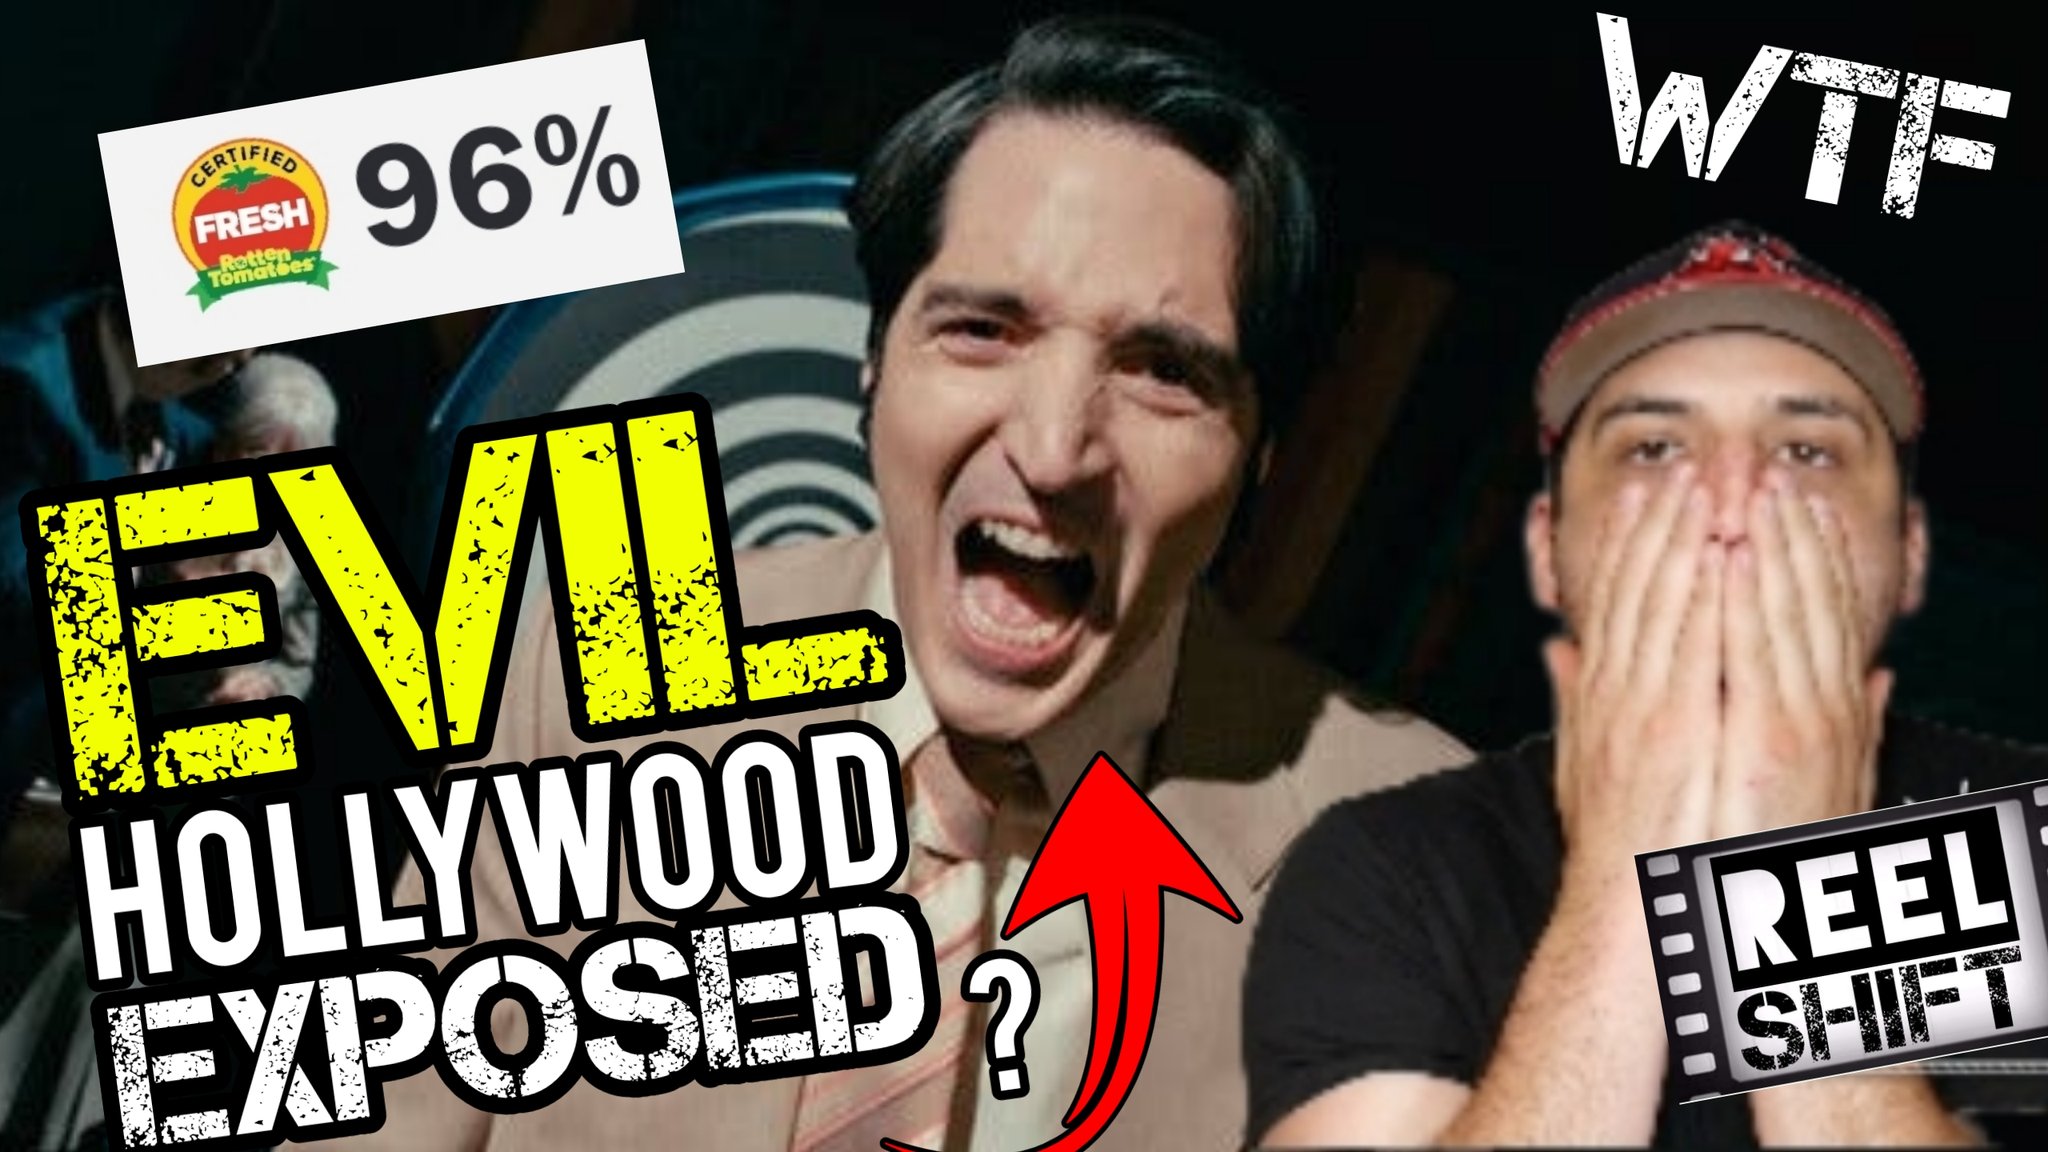 REEL SHIFT on X: NEW VIDEO #LateNightWithTheDevil Exposes EVIL